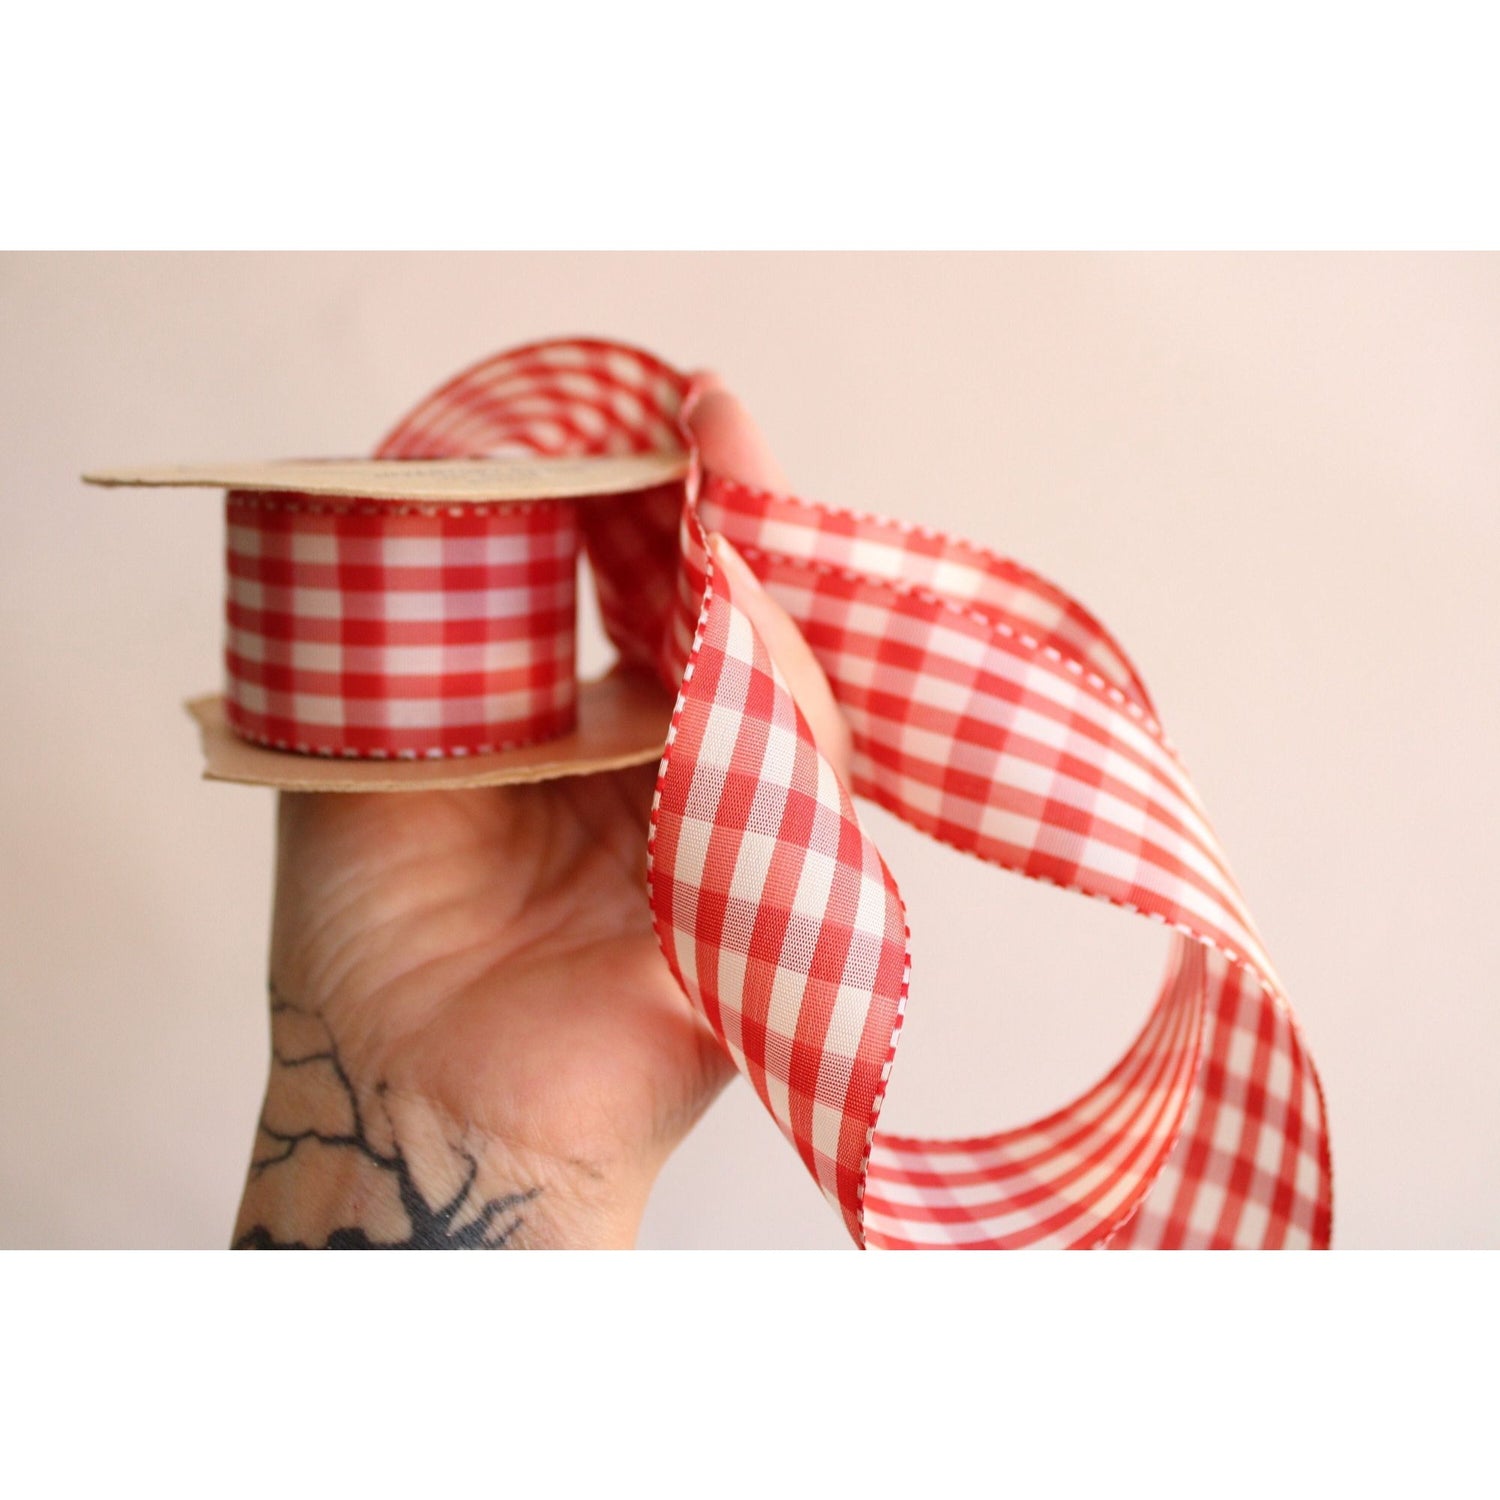 Vintage Red and White Gingham Ribbon Trim 1.5, 2 Yards